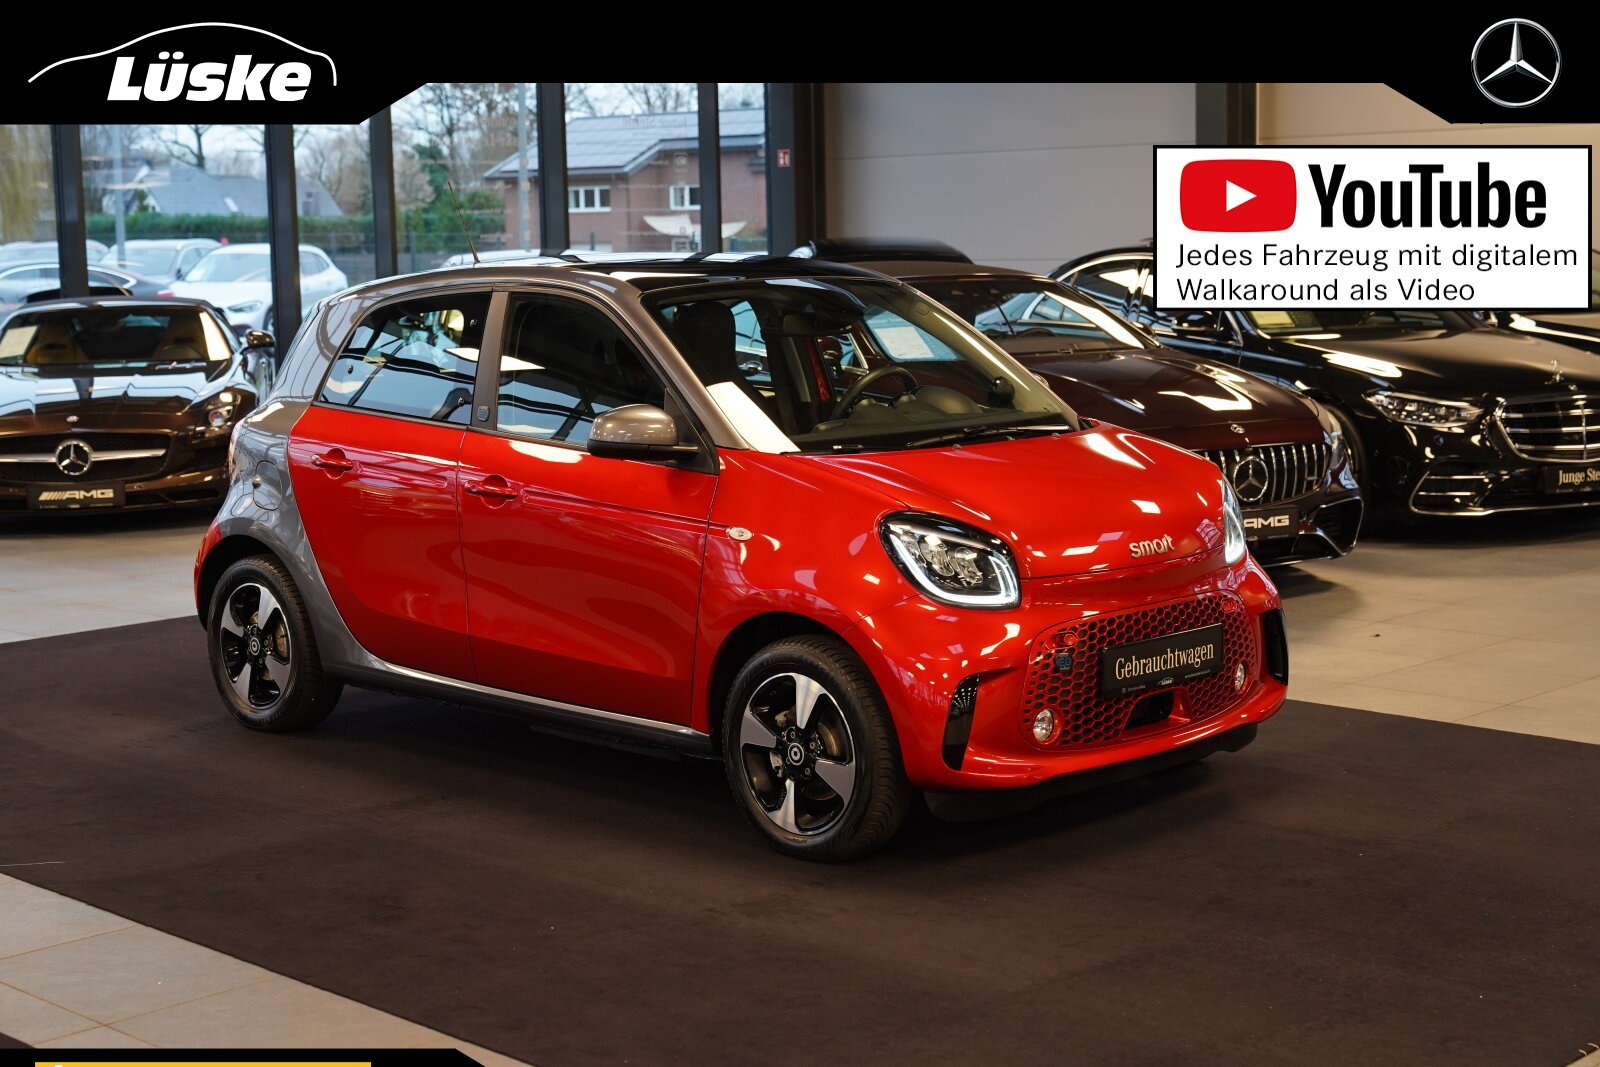 smart EQ forfour EXCLUSIVE 22kW